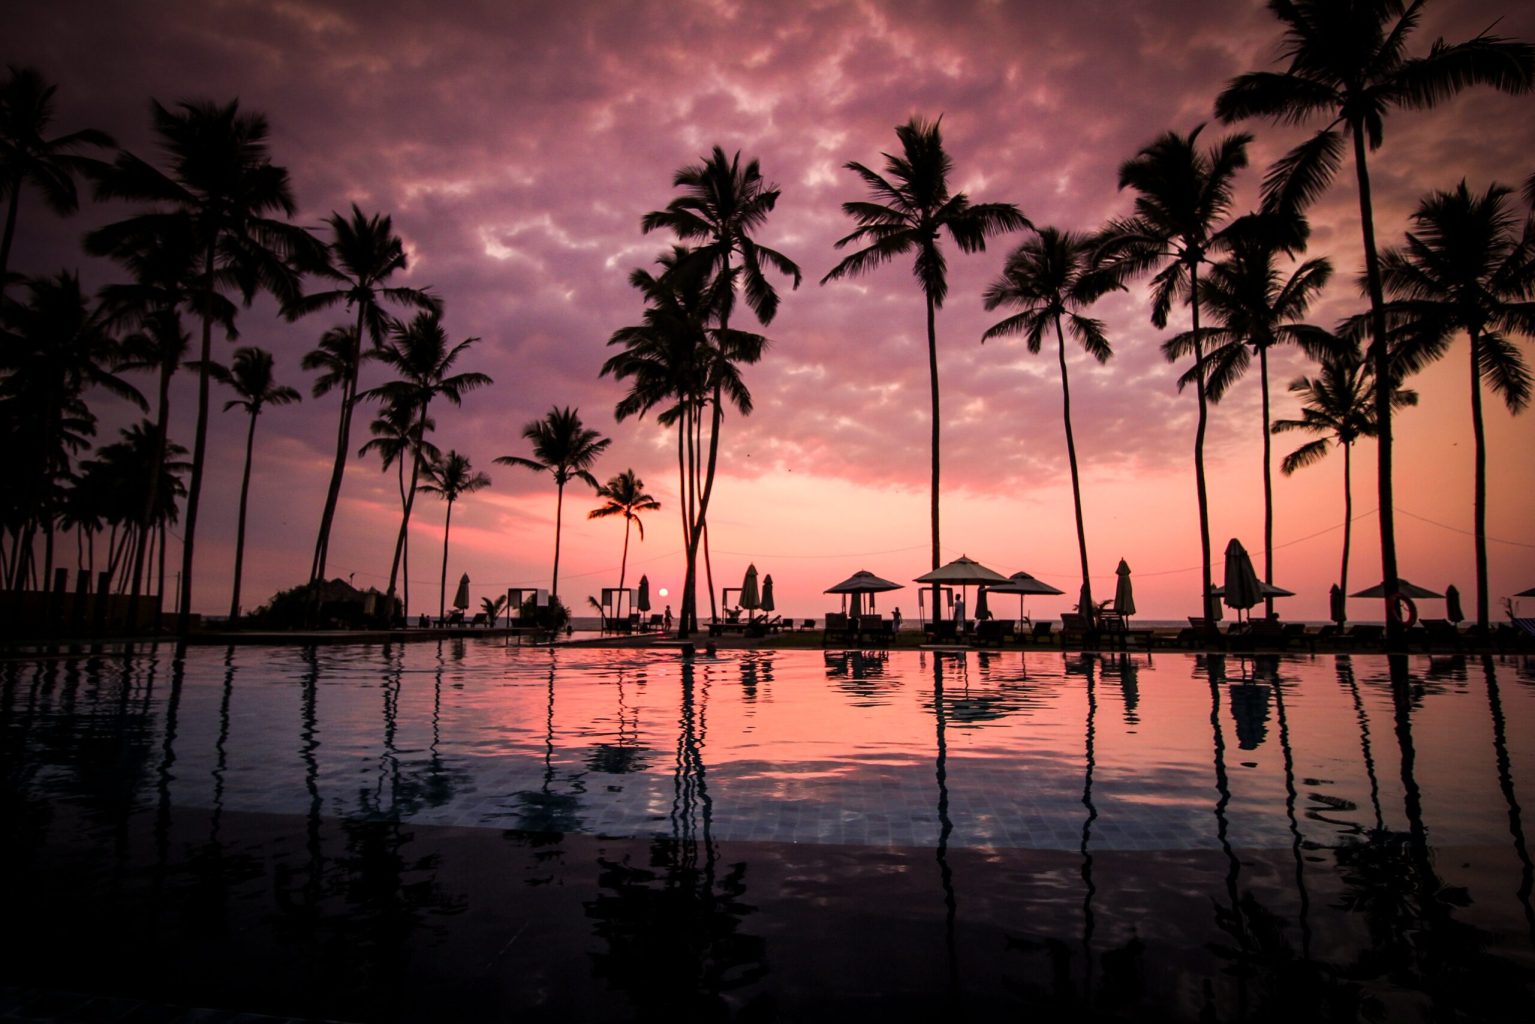 a group of palm trees next to a body of water